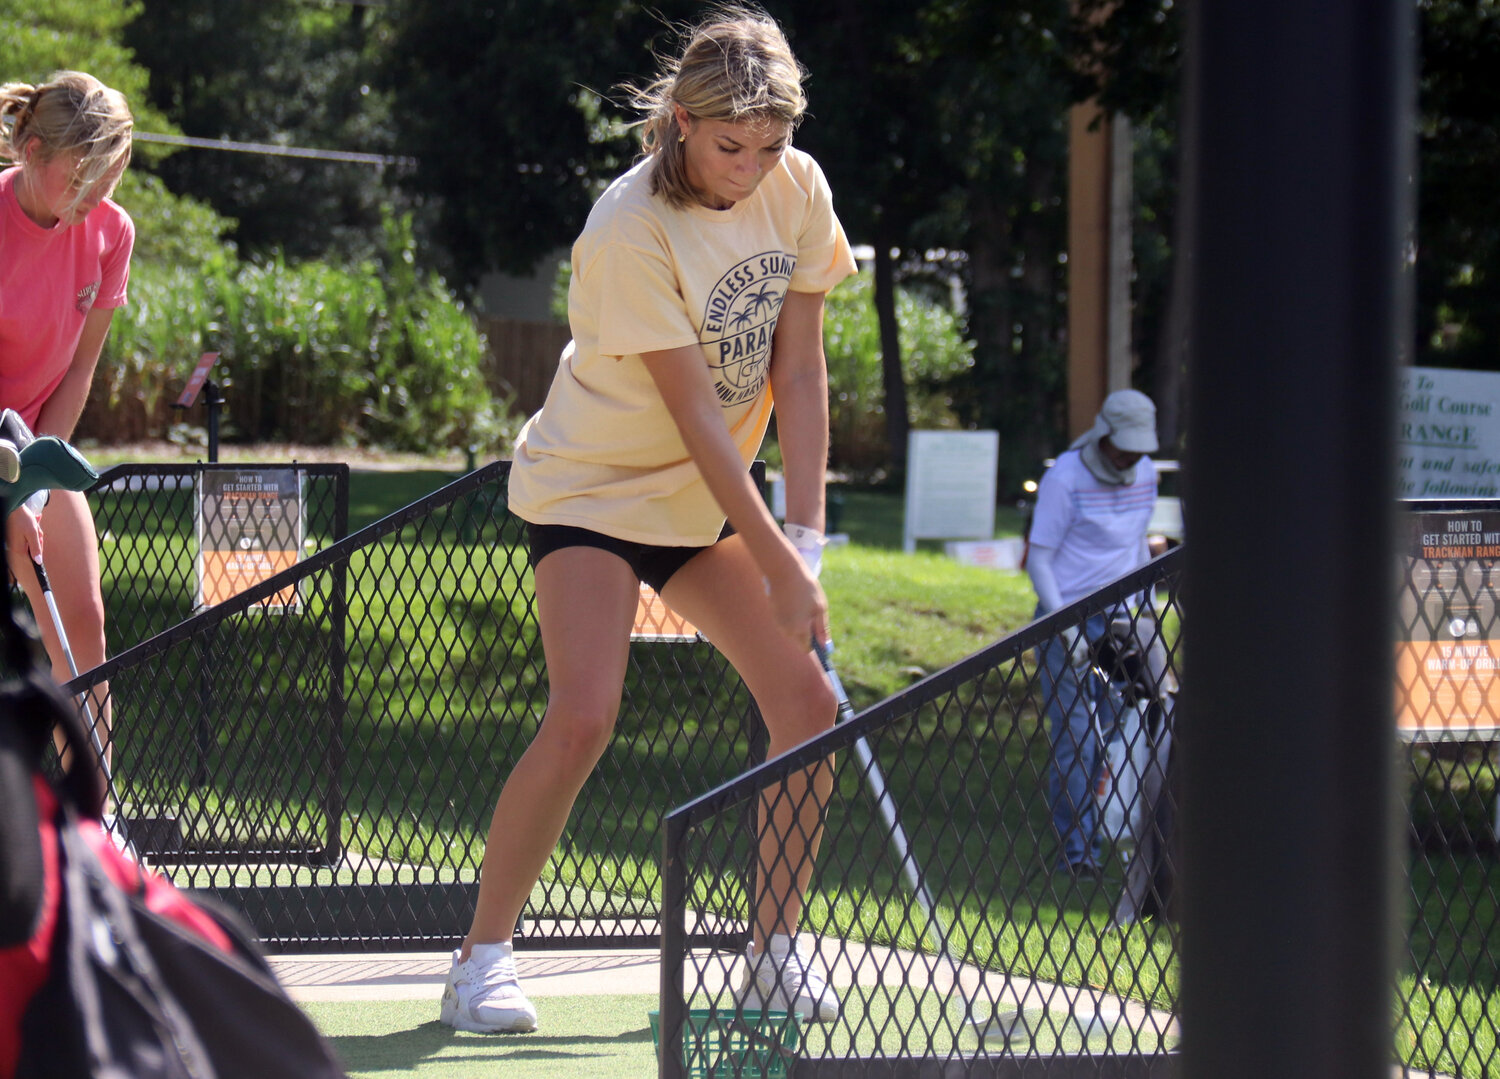 Sierra Foley sets up before swinging her club at the driving range during a practice earlier this month.